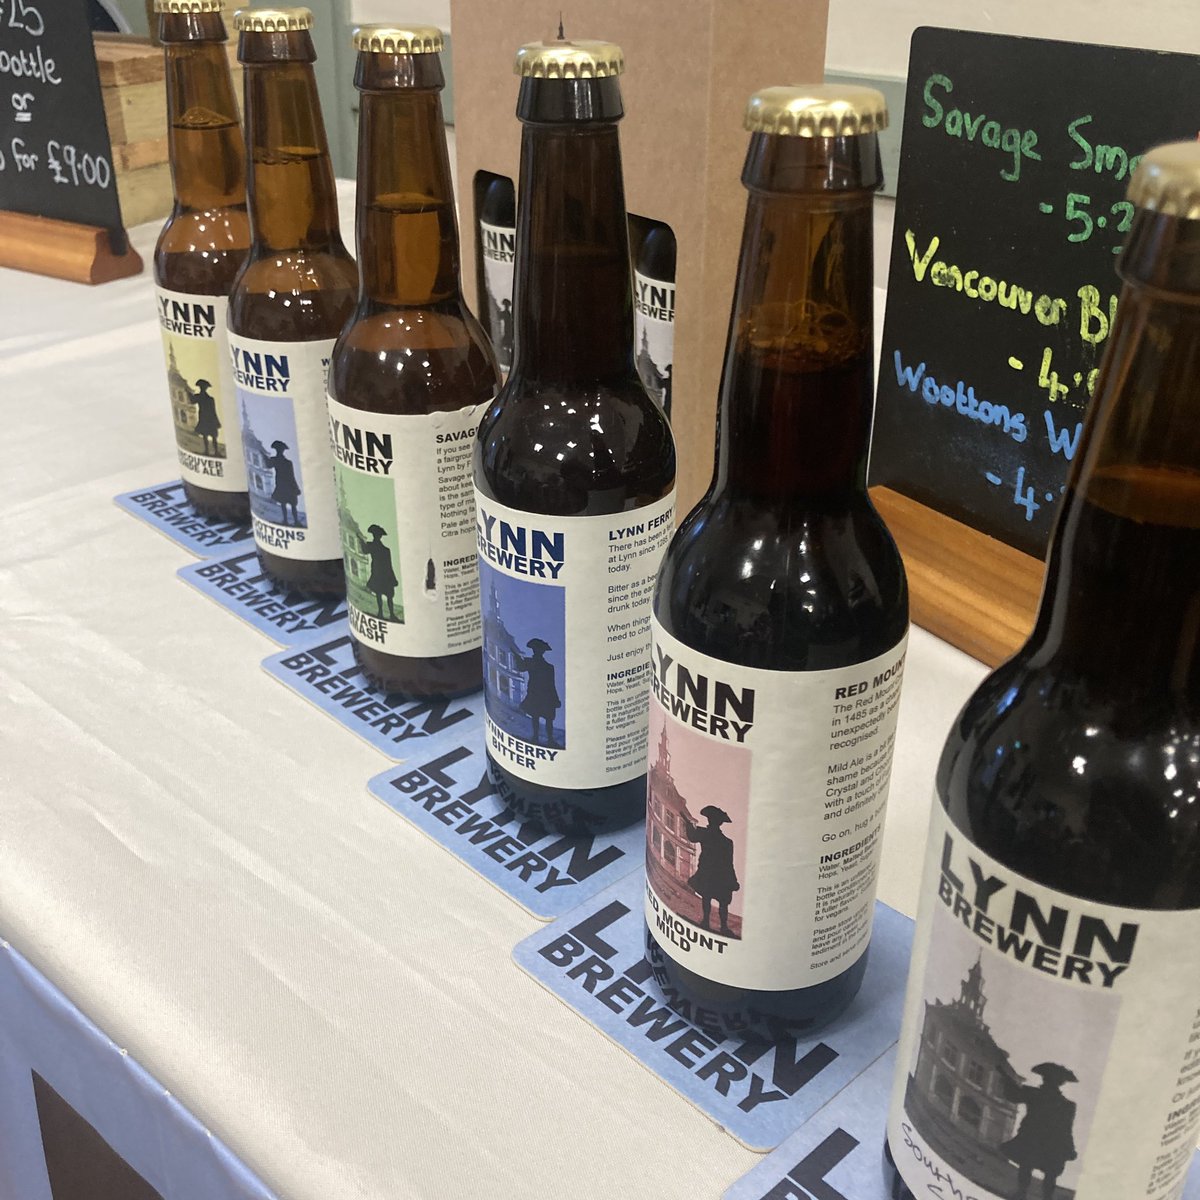 It’s the North Wooton Village Market today - our final market before Christmas! We have six different beers available today, from Blonde Ale to Oatmeal Stout - and all can be purchased in a gift box! Hope to see lots of you - we’re here until 2pm. @northwoottonvh